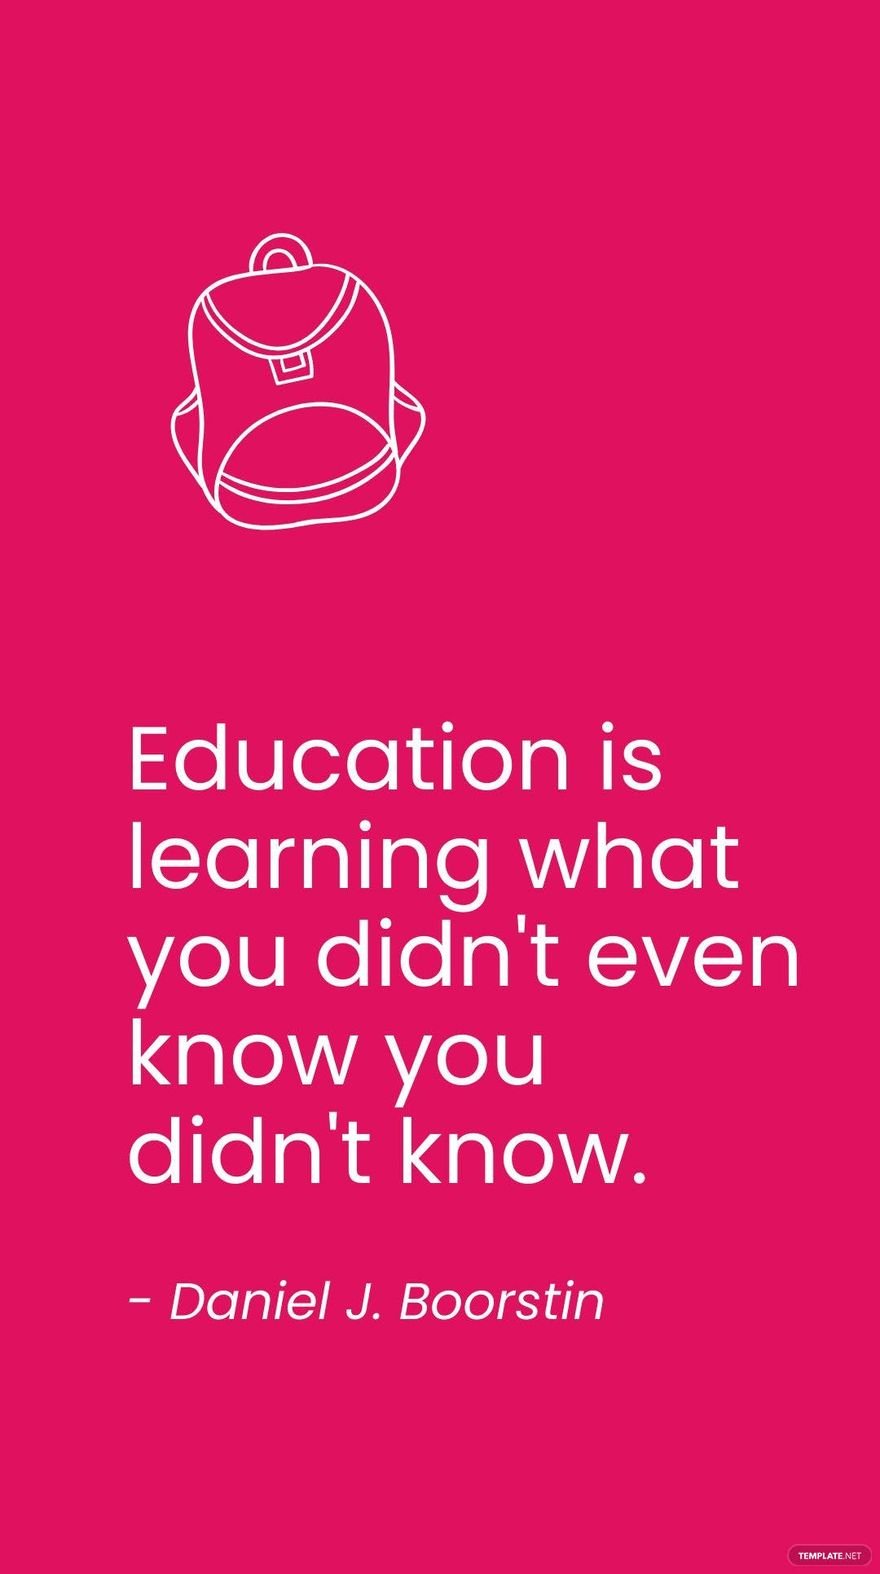 Daniel J. Boorstin - Education is learning what you didn't even know you didn't know.